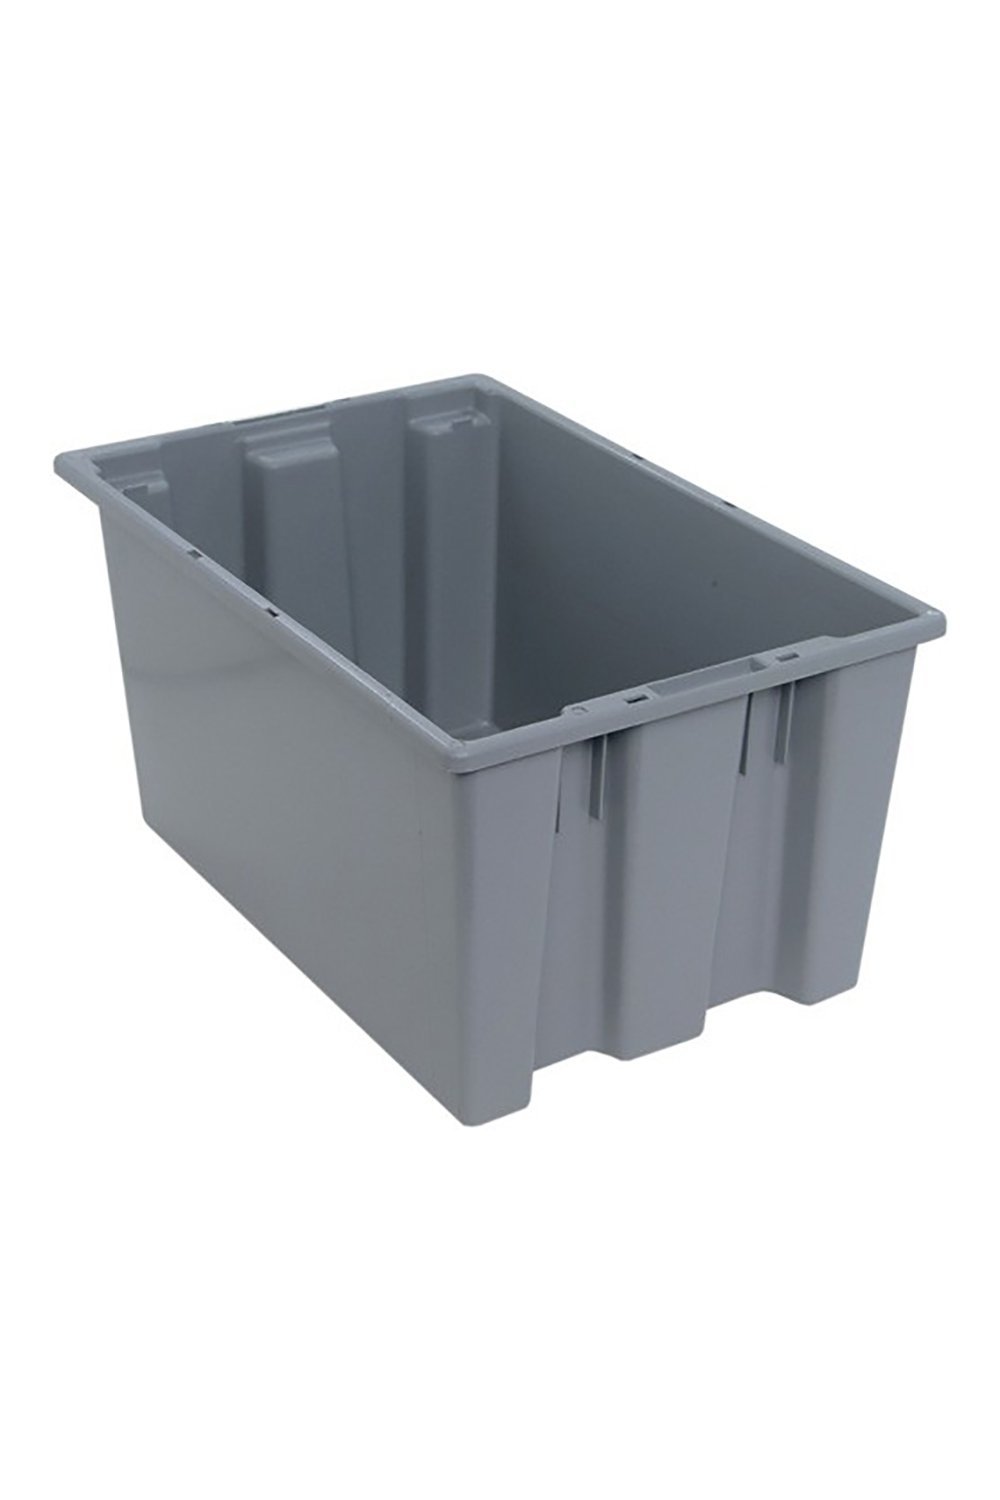 Stack and Nest Tote Bins & Containers Acart 23-1/2"L x 15-1/2"W x 12"H Gray 